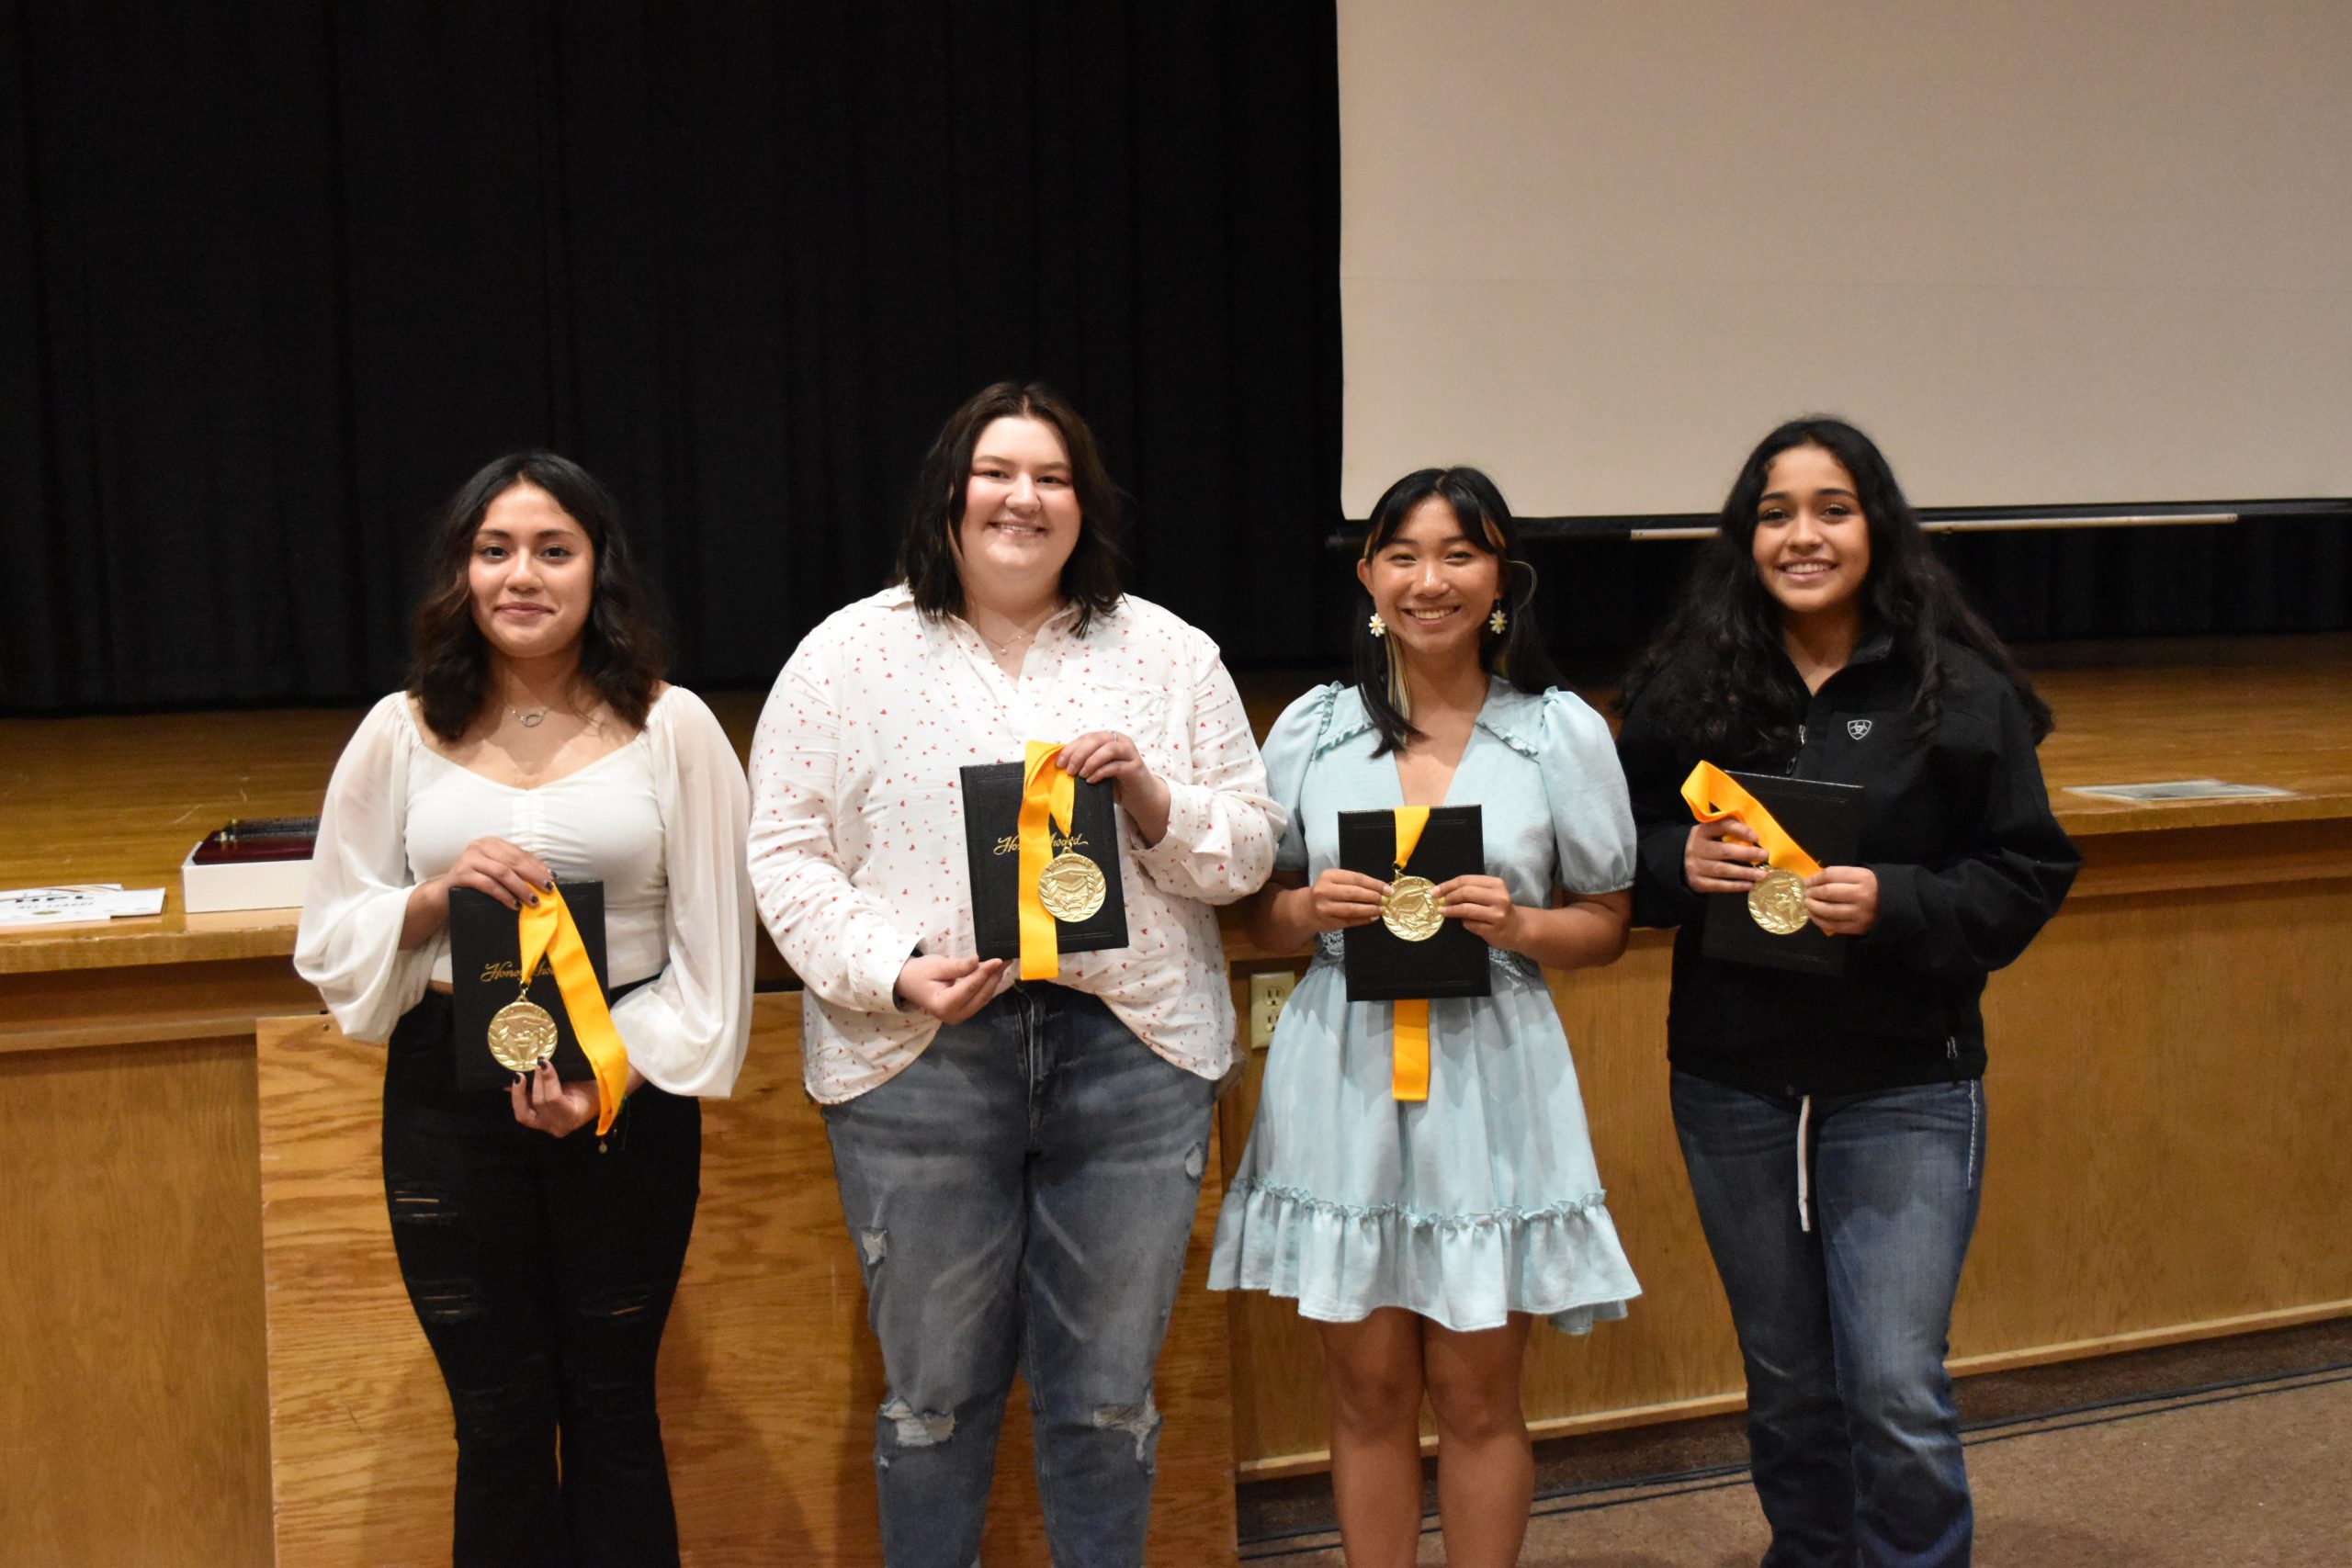 Southwestern Heights Students Recognized at Awards Assembly